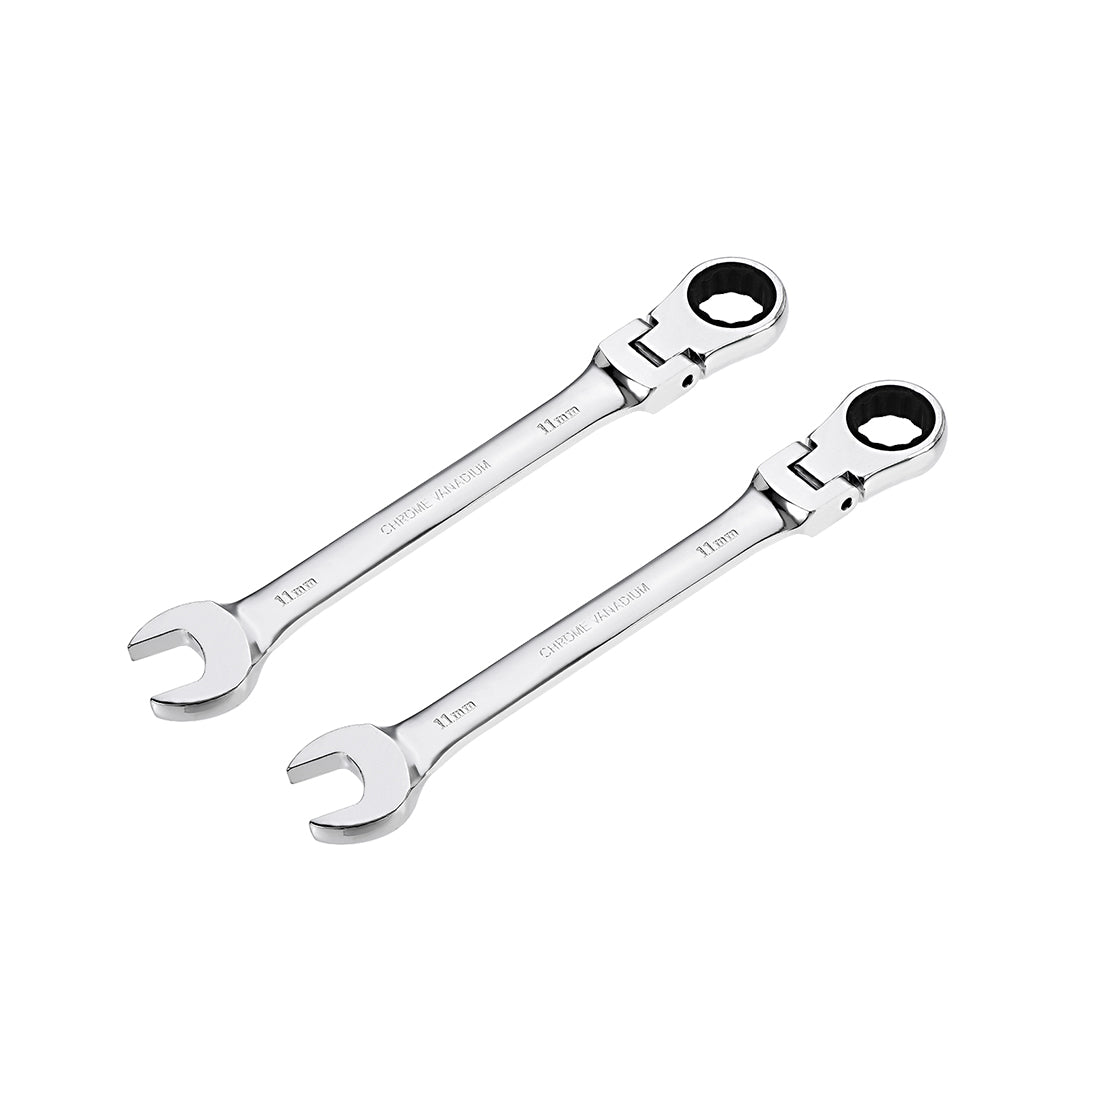 uxcell Uxcell Flex-Head Ratcheting Combination Wrench Metric 72 Teeth 12 Point Ratchet Box Ended Spanner Tool, Cr-V